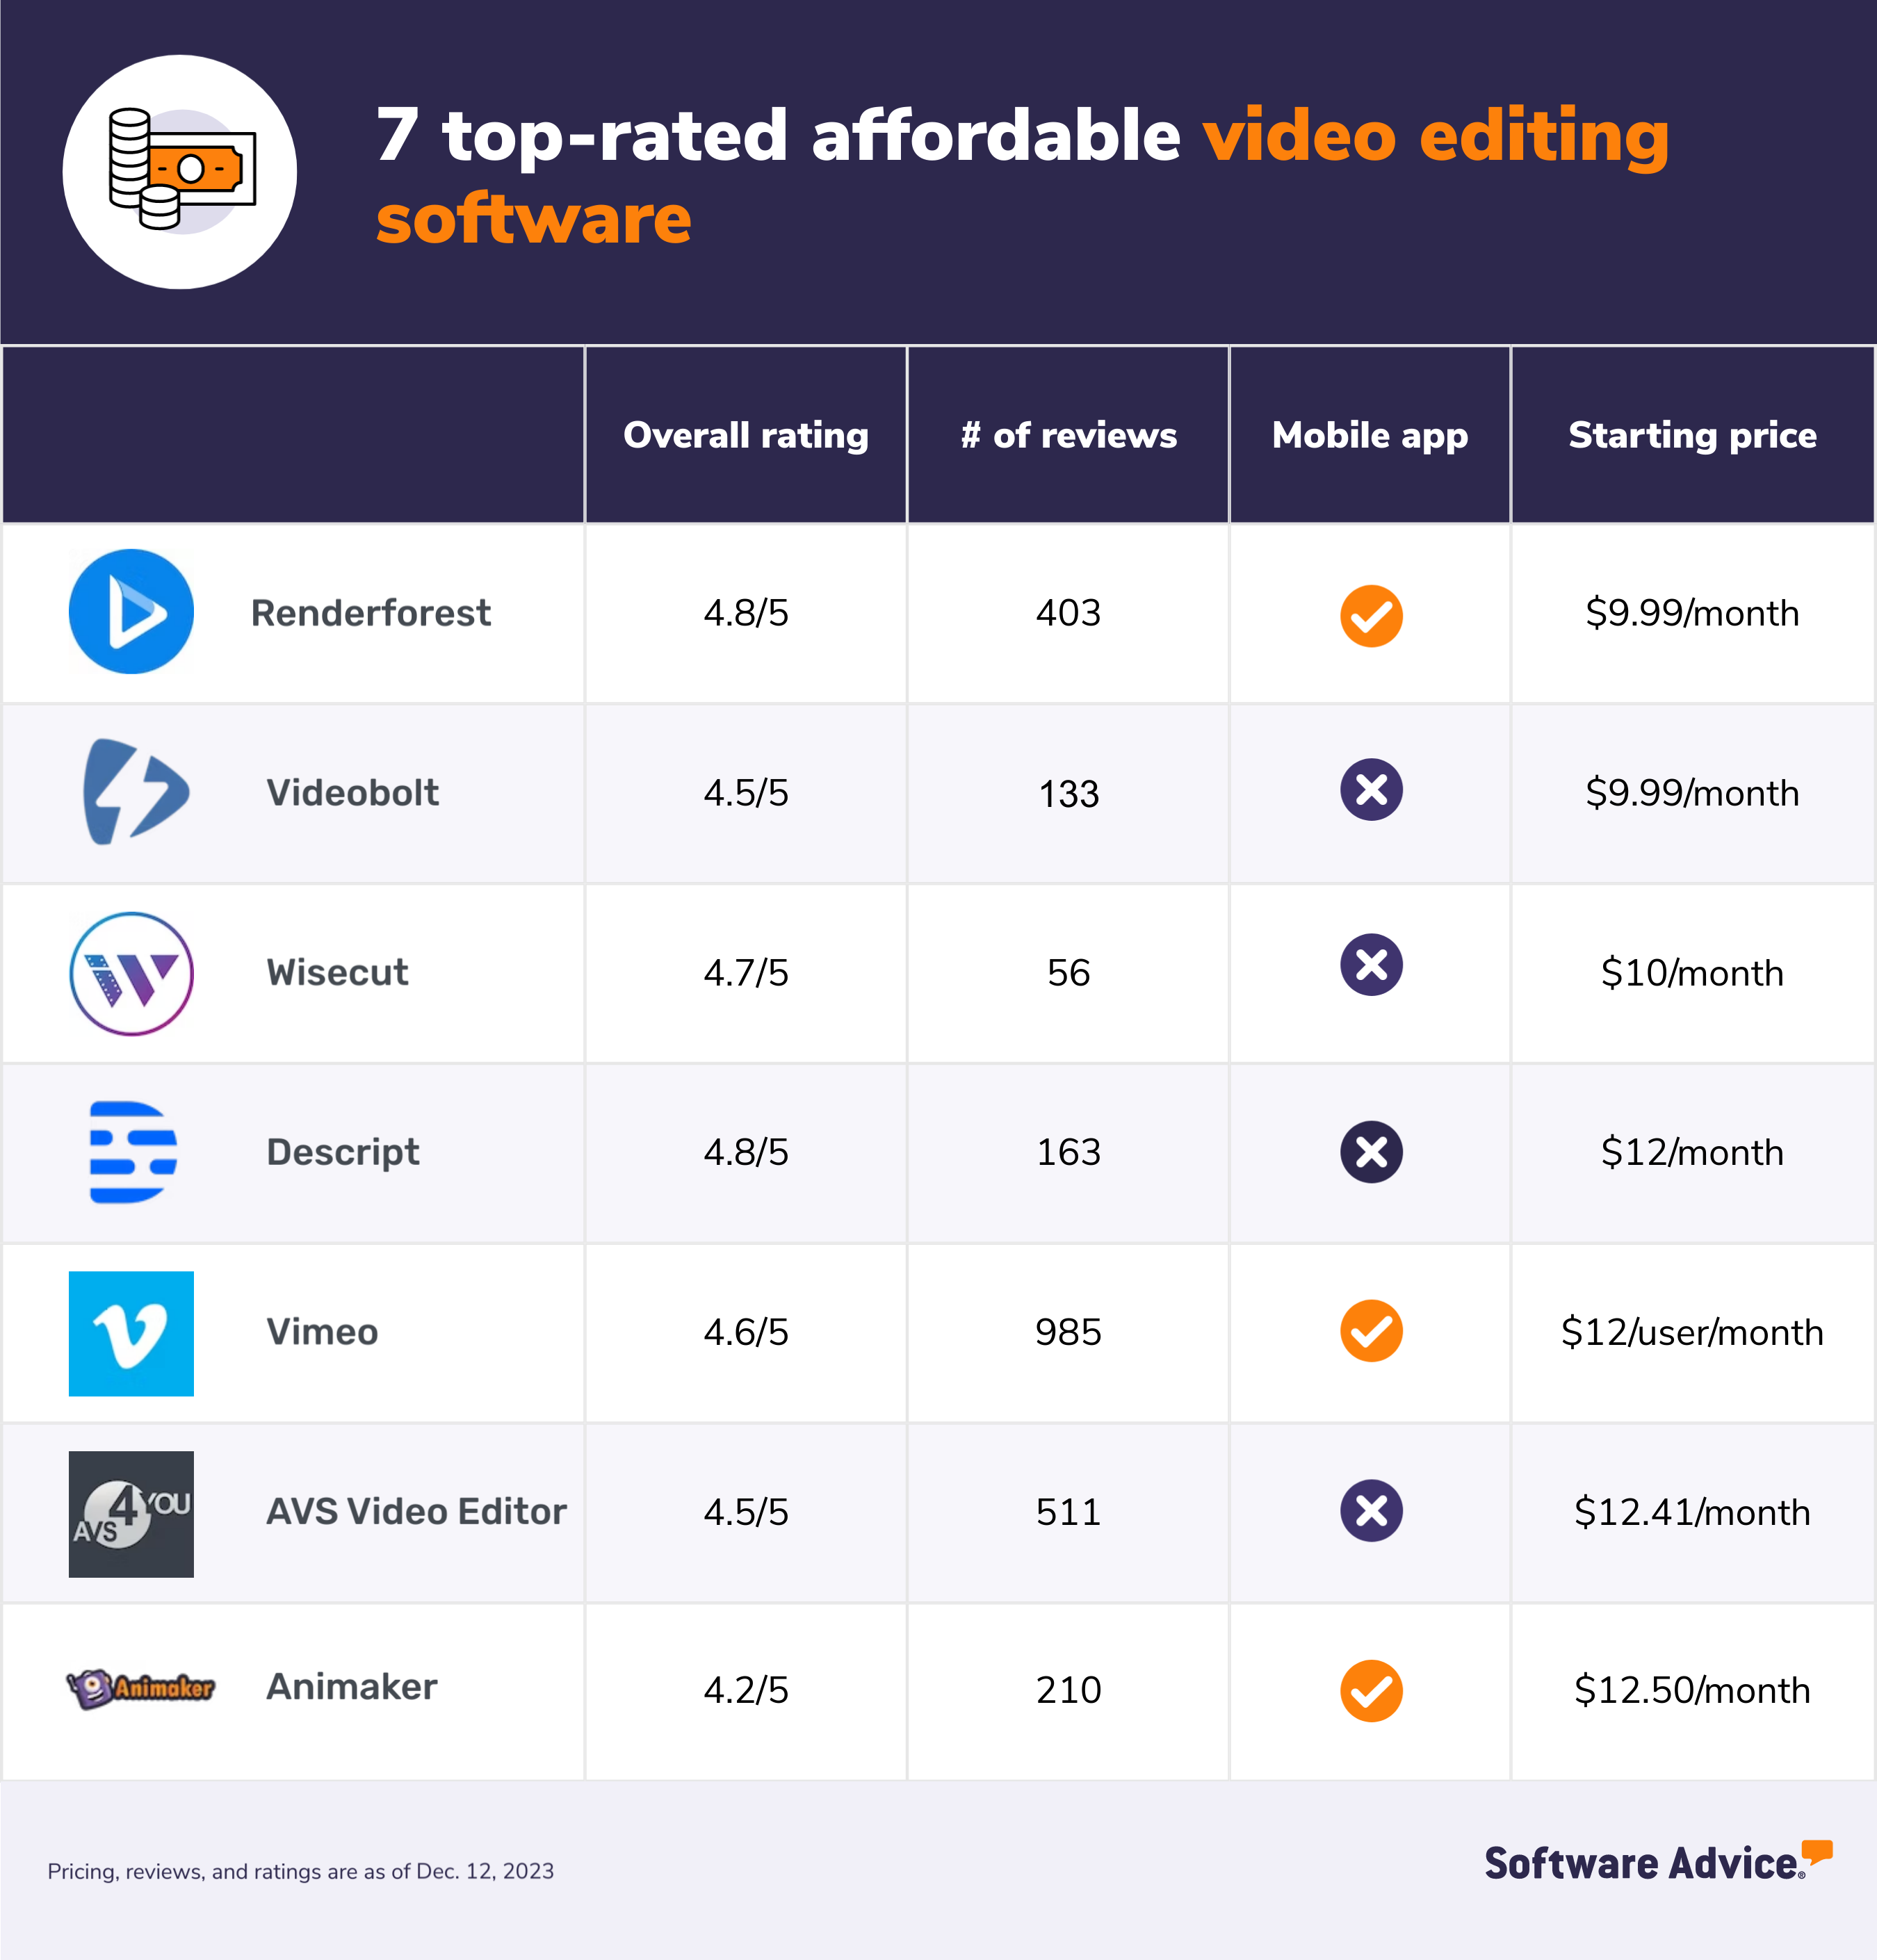 Software Advice graphic: 7 top-rated affordable video editing software